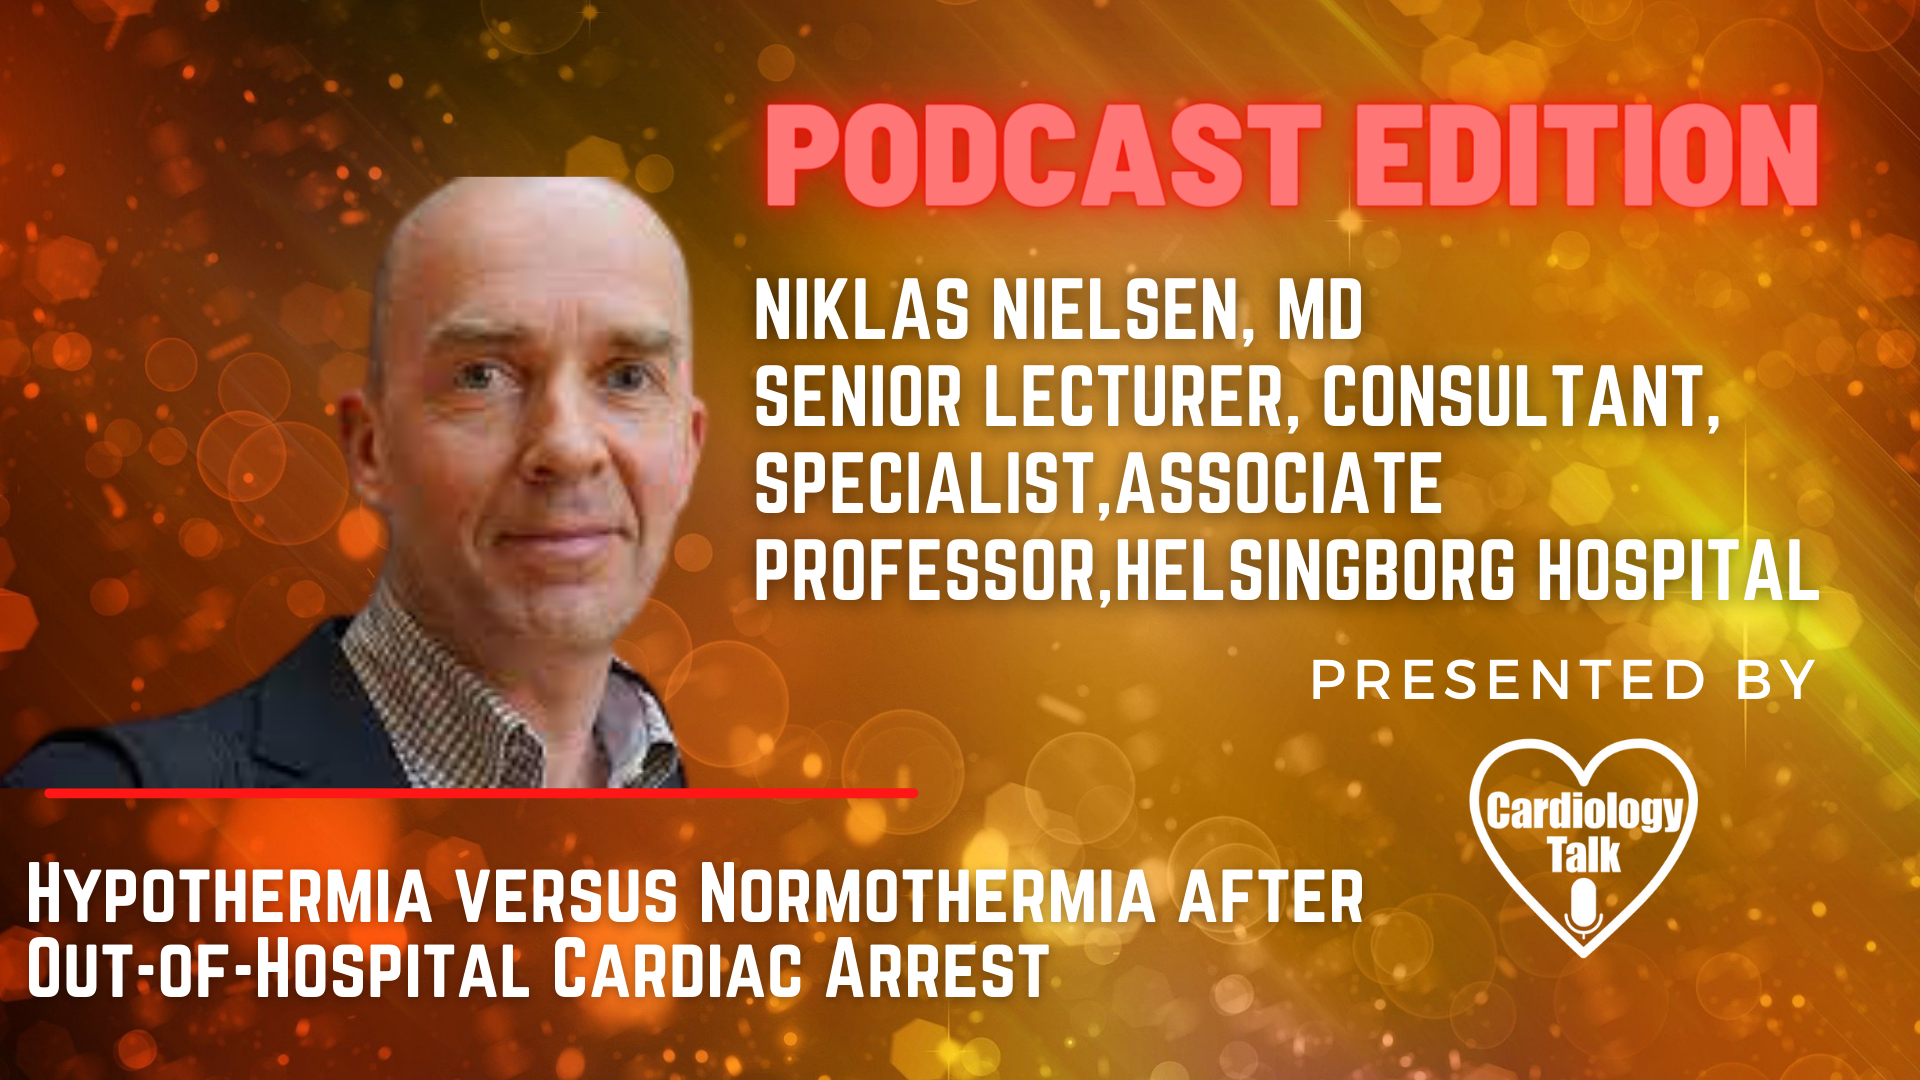 Podcast- Niklas Nielsen, MD - #HelsingborgHospital #CardiacArrest #Cardiology #Research  Hypothermia versus Normothermia after Out-of-Hospital Cardiac Arrest